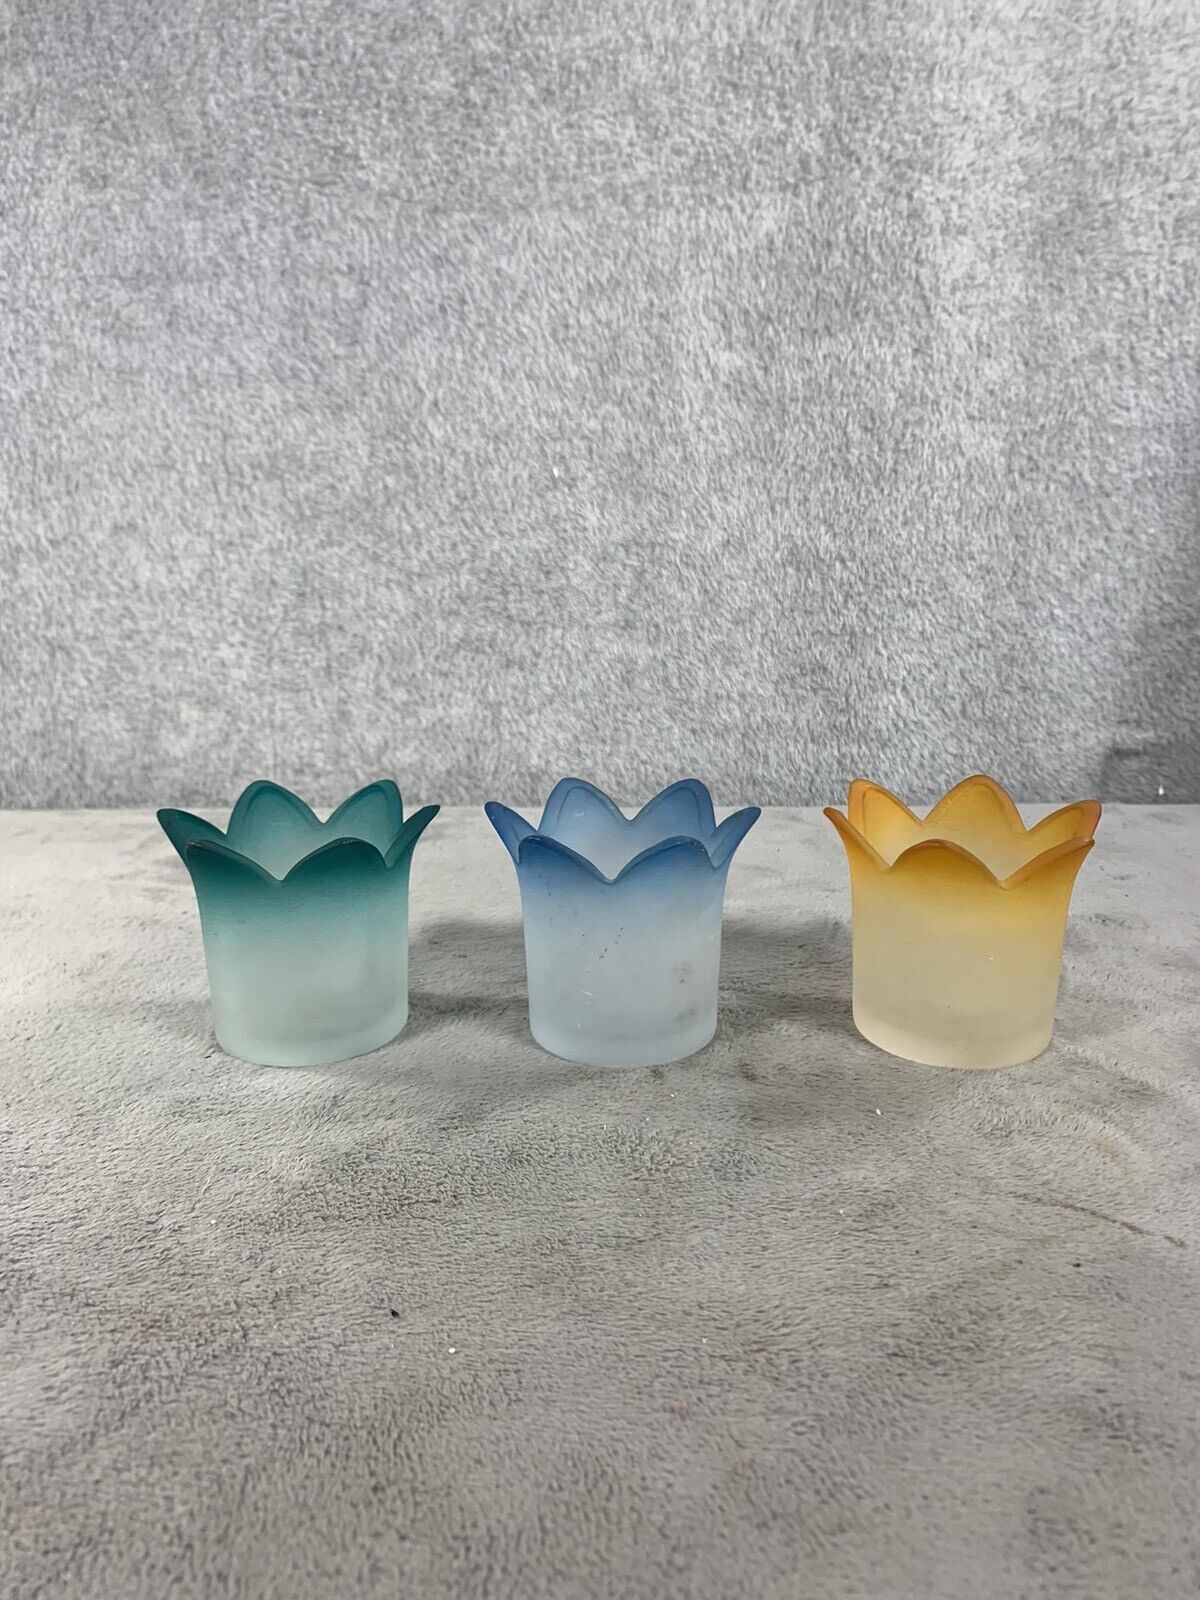 PartyLite(3) P7161 Jewel Frosted Tulip Glass Votive Tealite Candle Holders